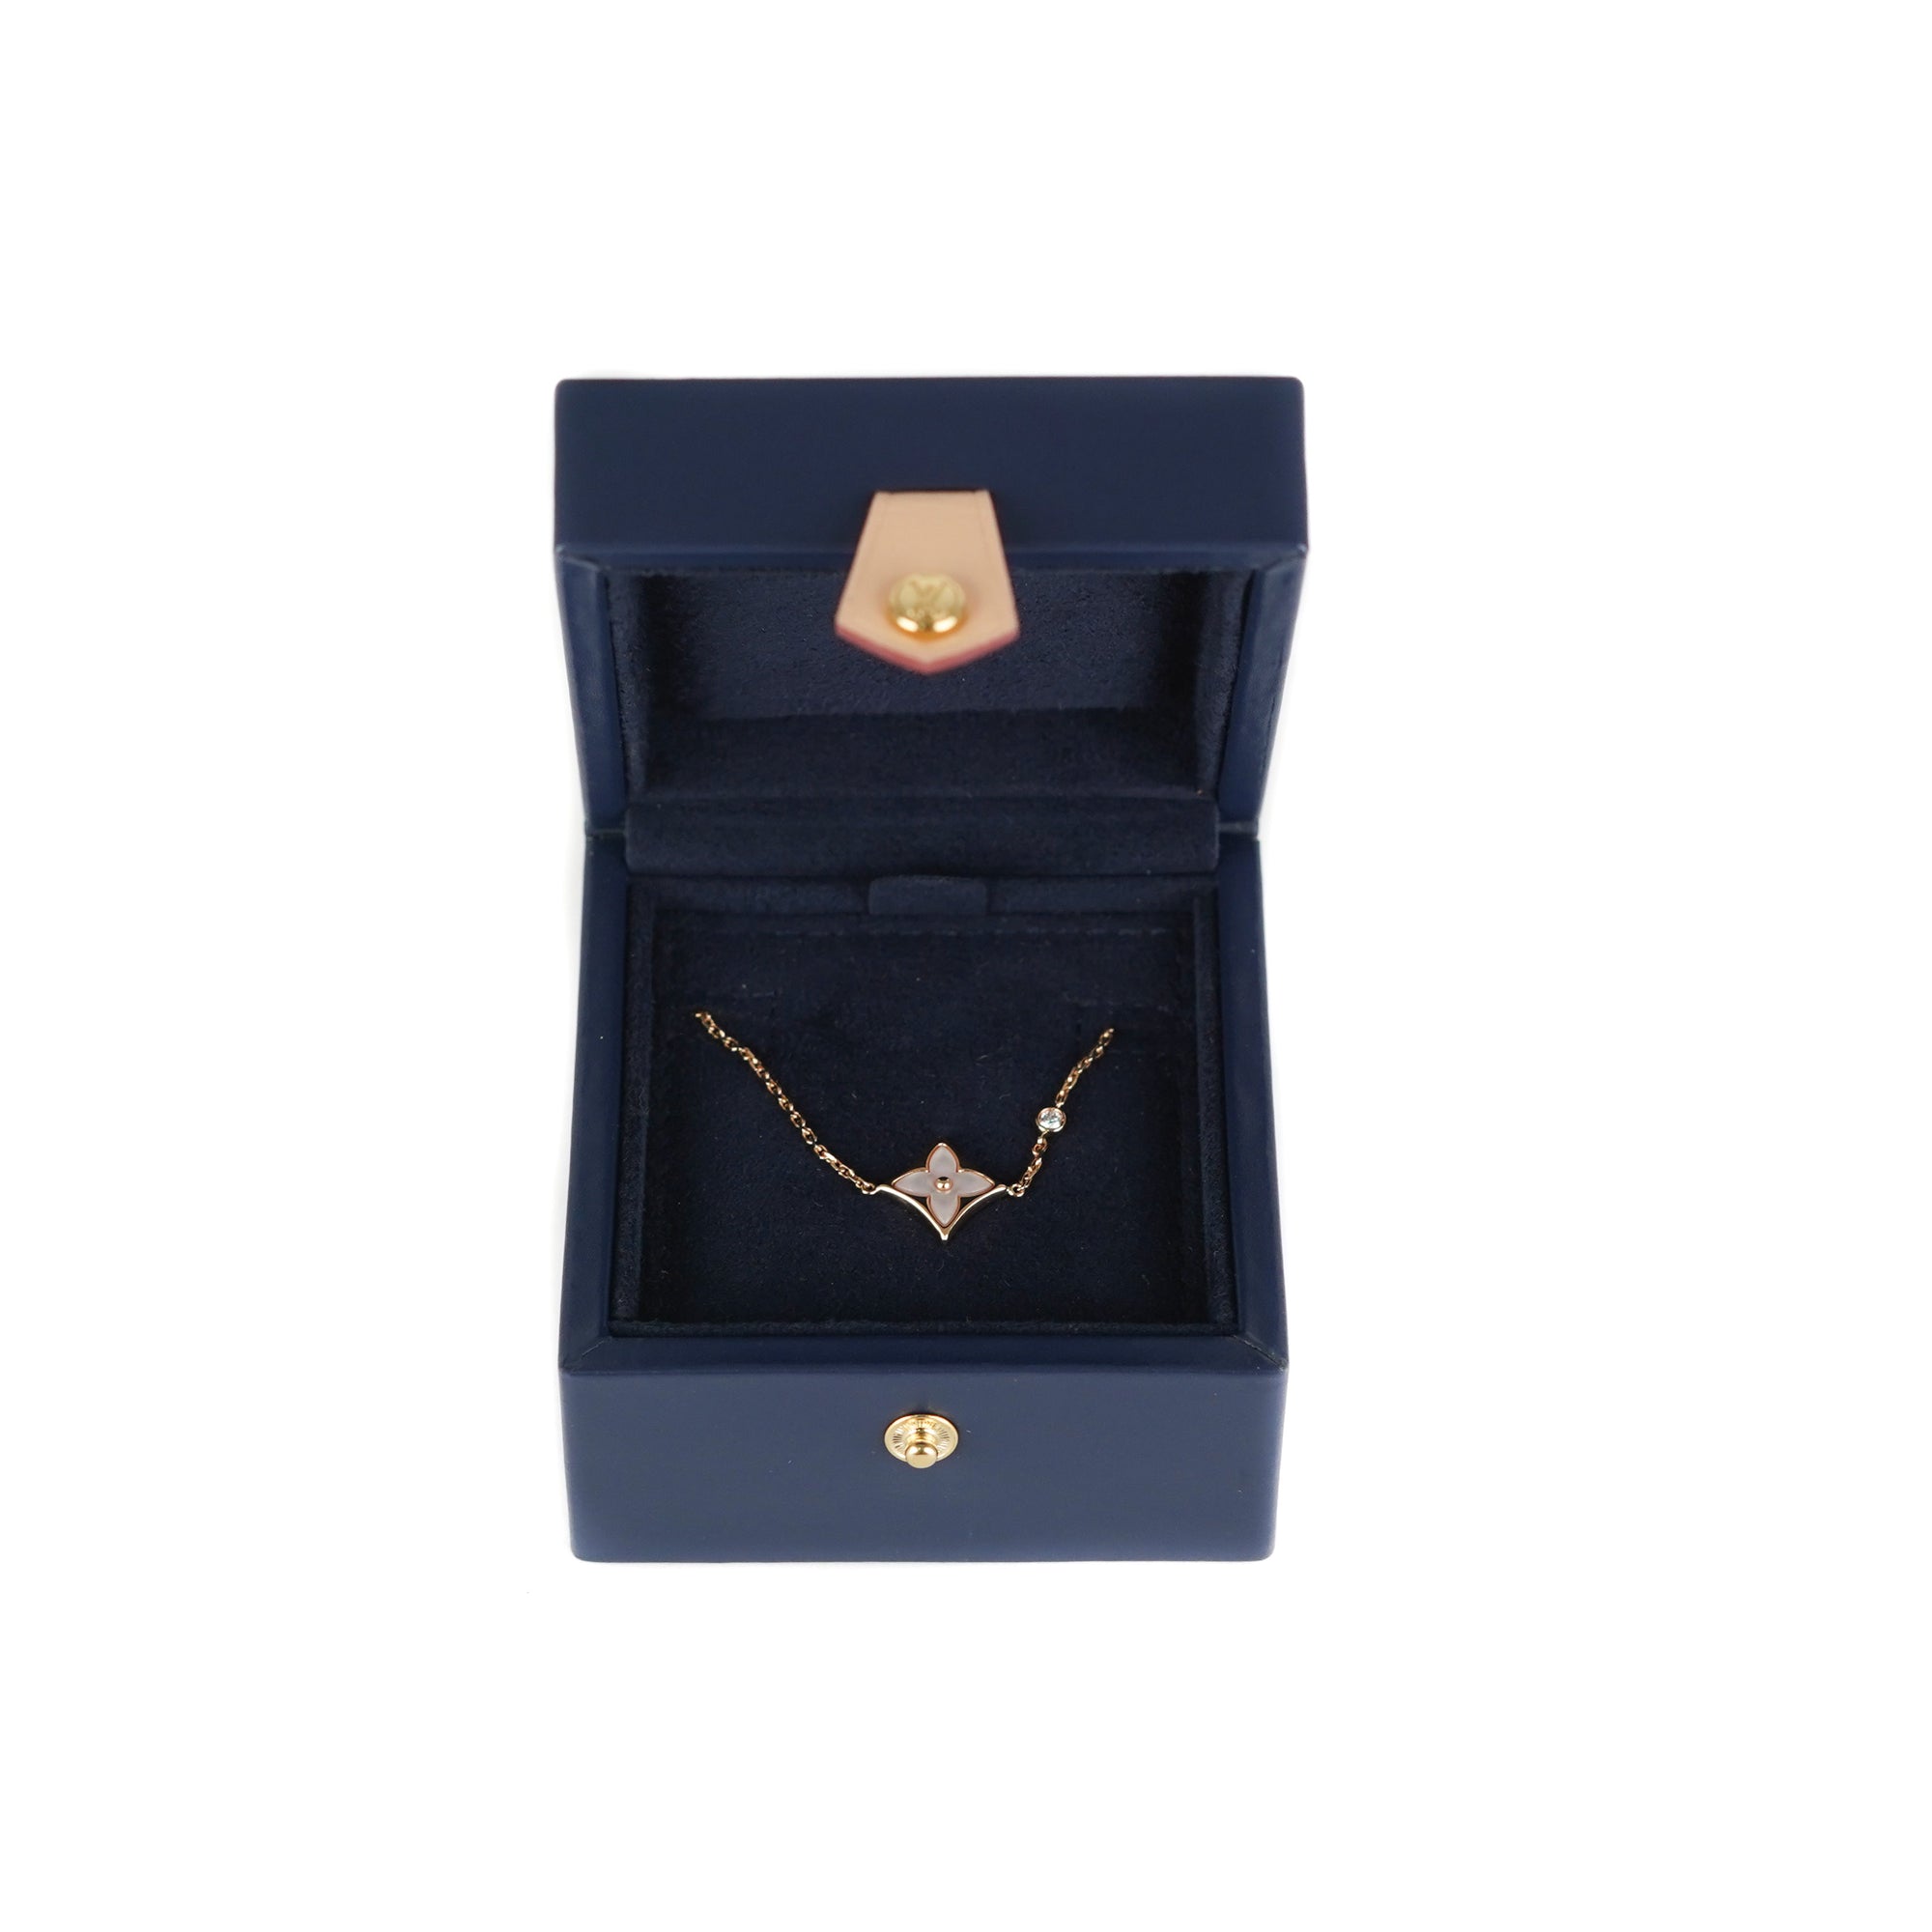 Louis Vuitton Idylle Blossom Pendant, Pink Gold and Diamonds. Size NSA